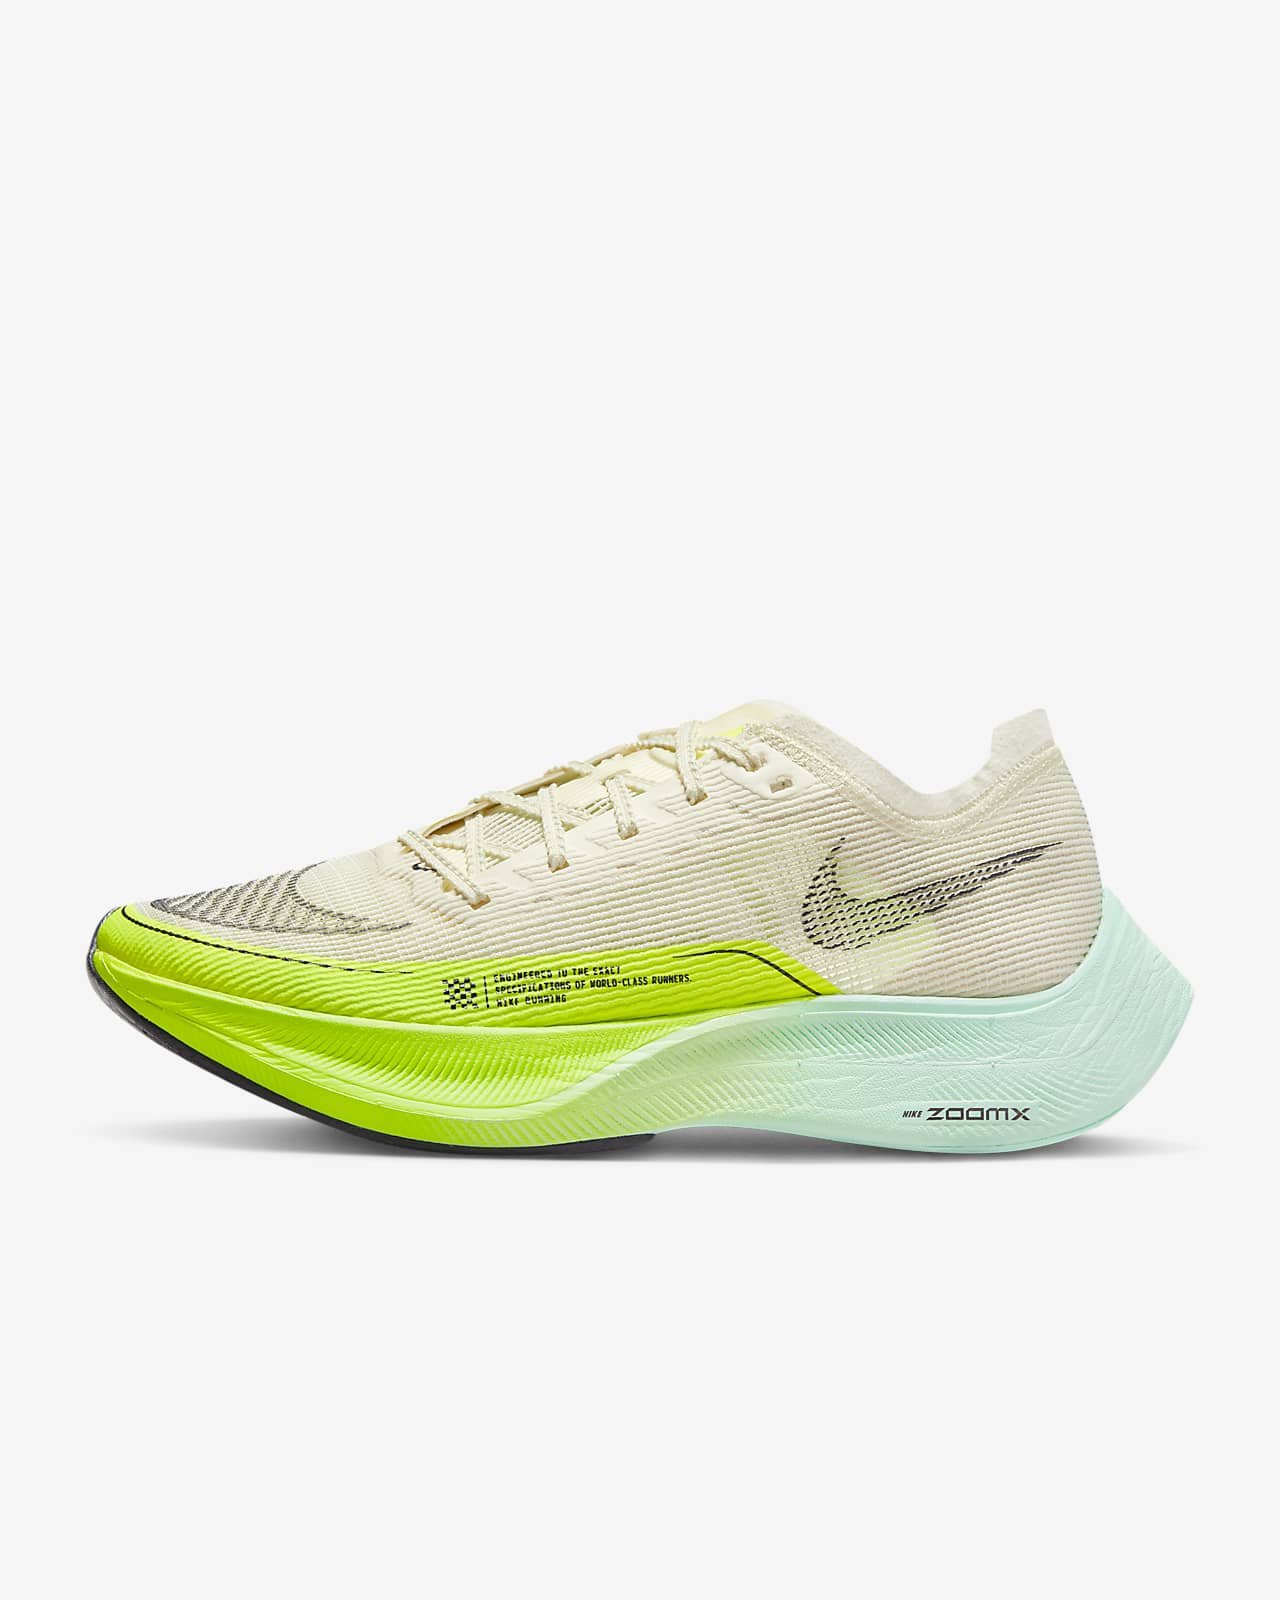 Nike ZoomX Vaporfly NEXT% 2 Women's Road Racing Shoes